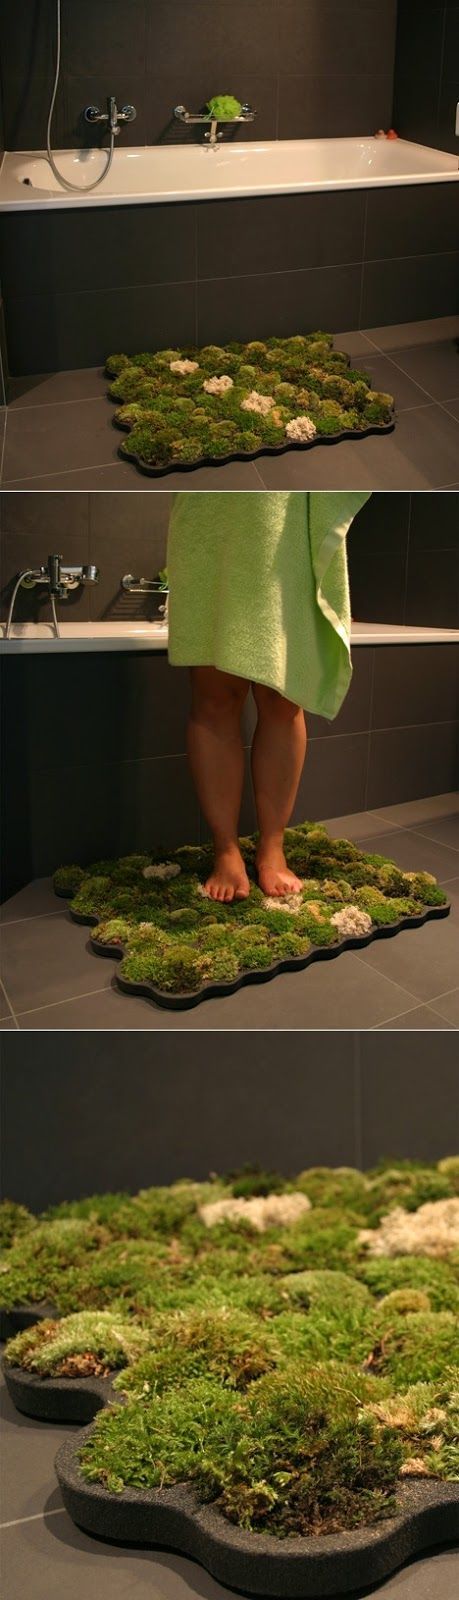 Moss Bathroom Mats : They don’t need dirt, just water and if they dry, they can live again just by being watered again. Each